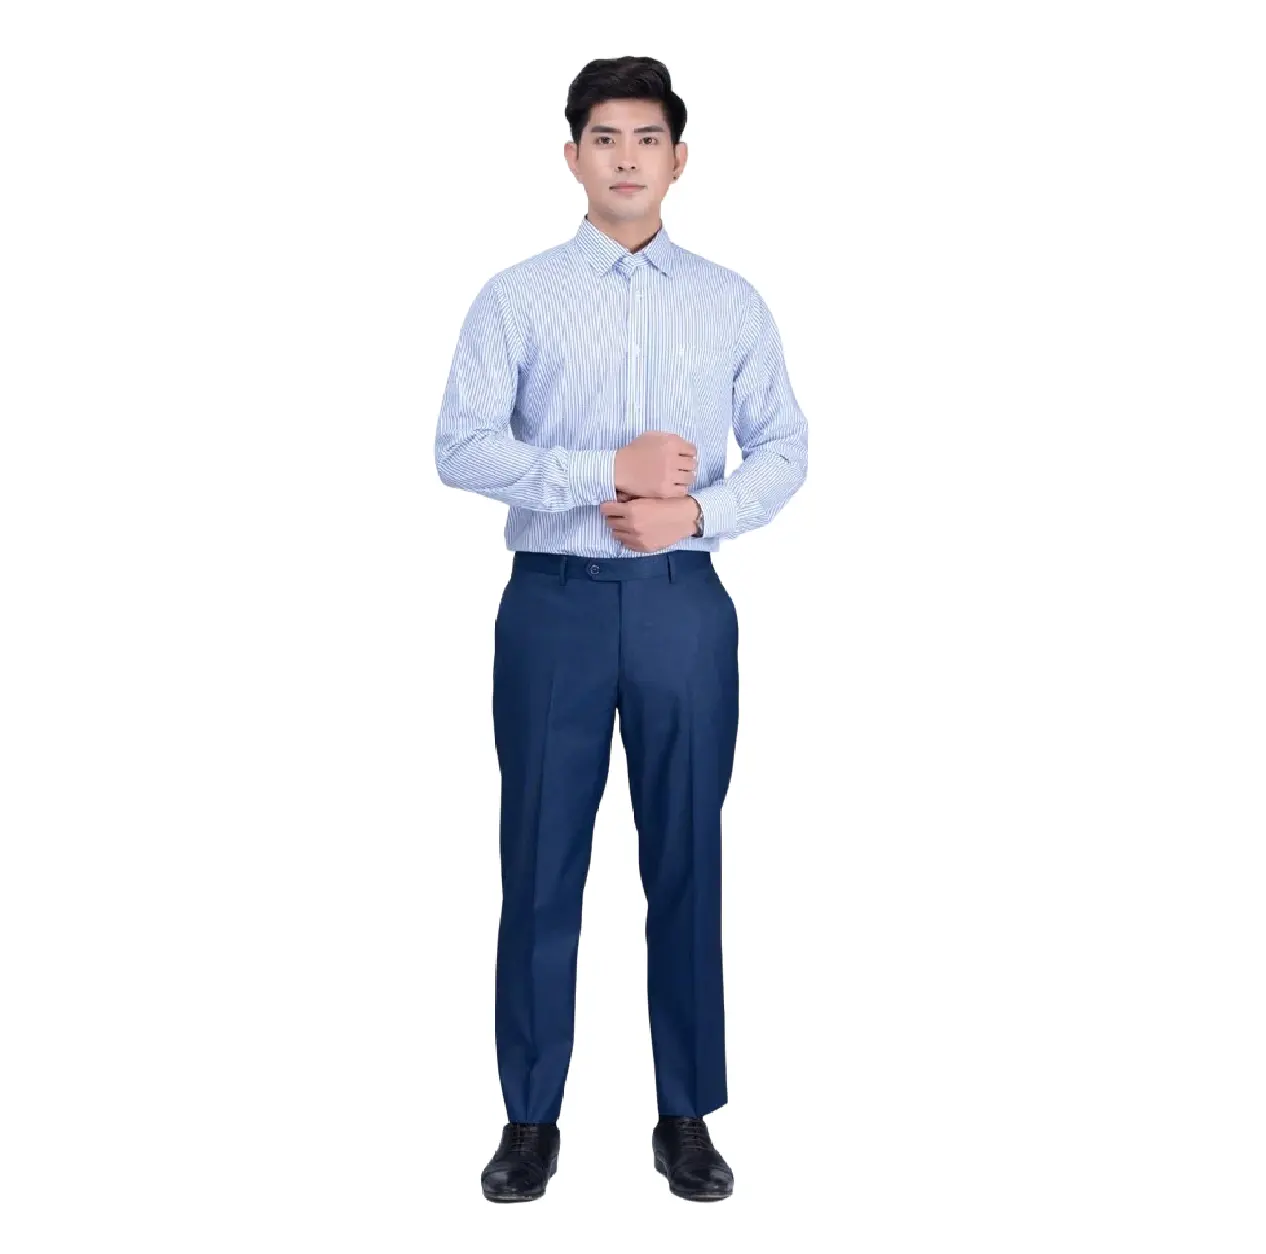 Recommended by seller - Most comfortable design for men trouser - Bang Viet Low MOQ Men pant/trouser for sale